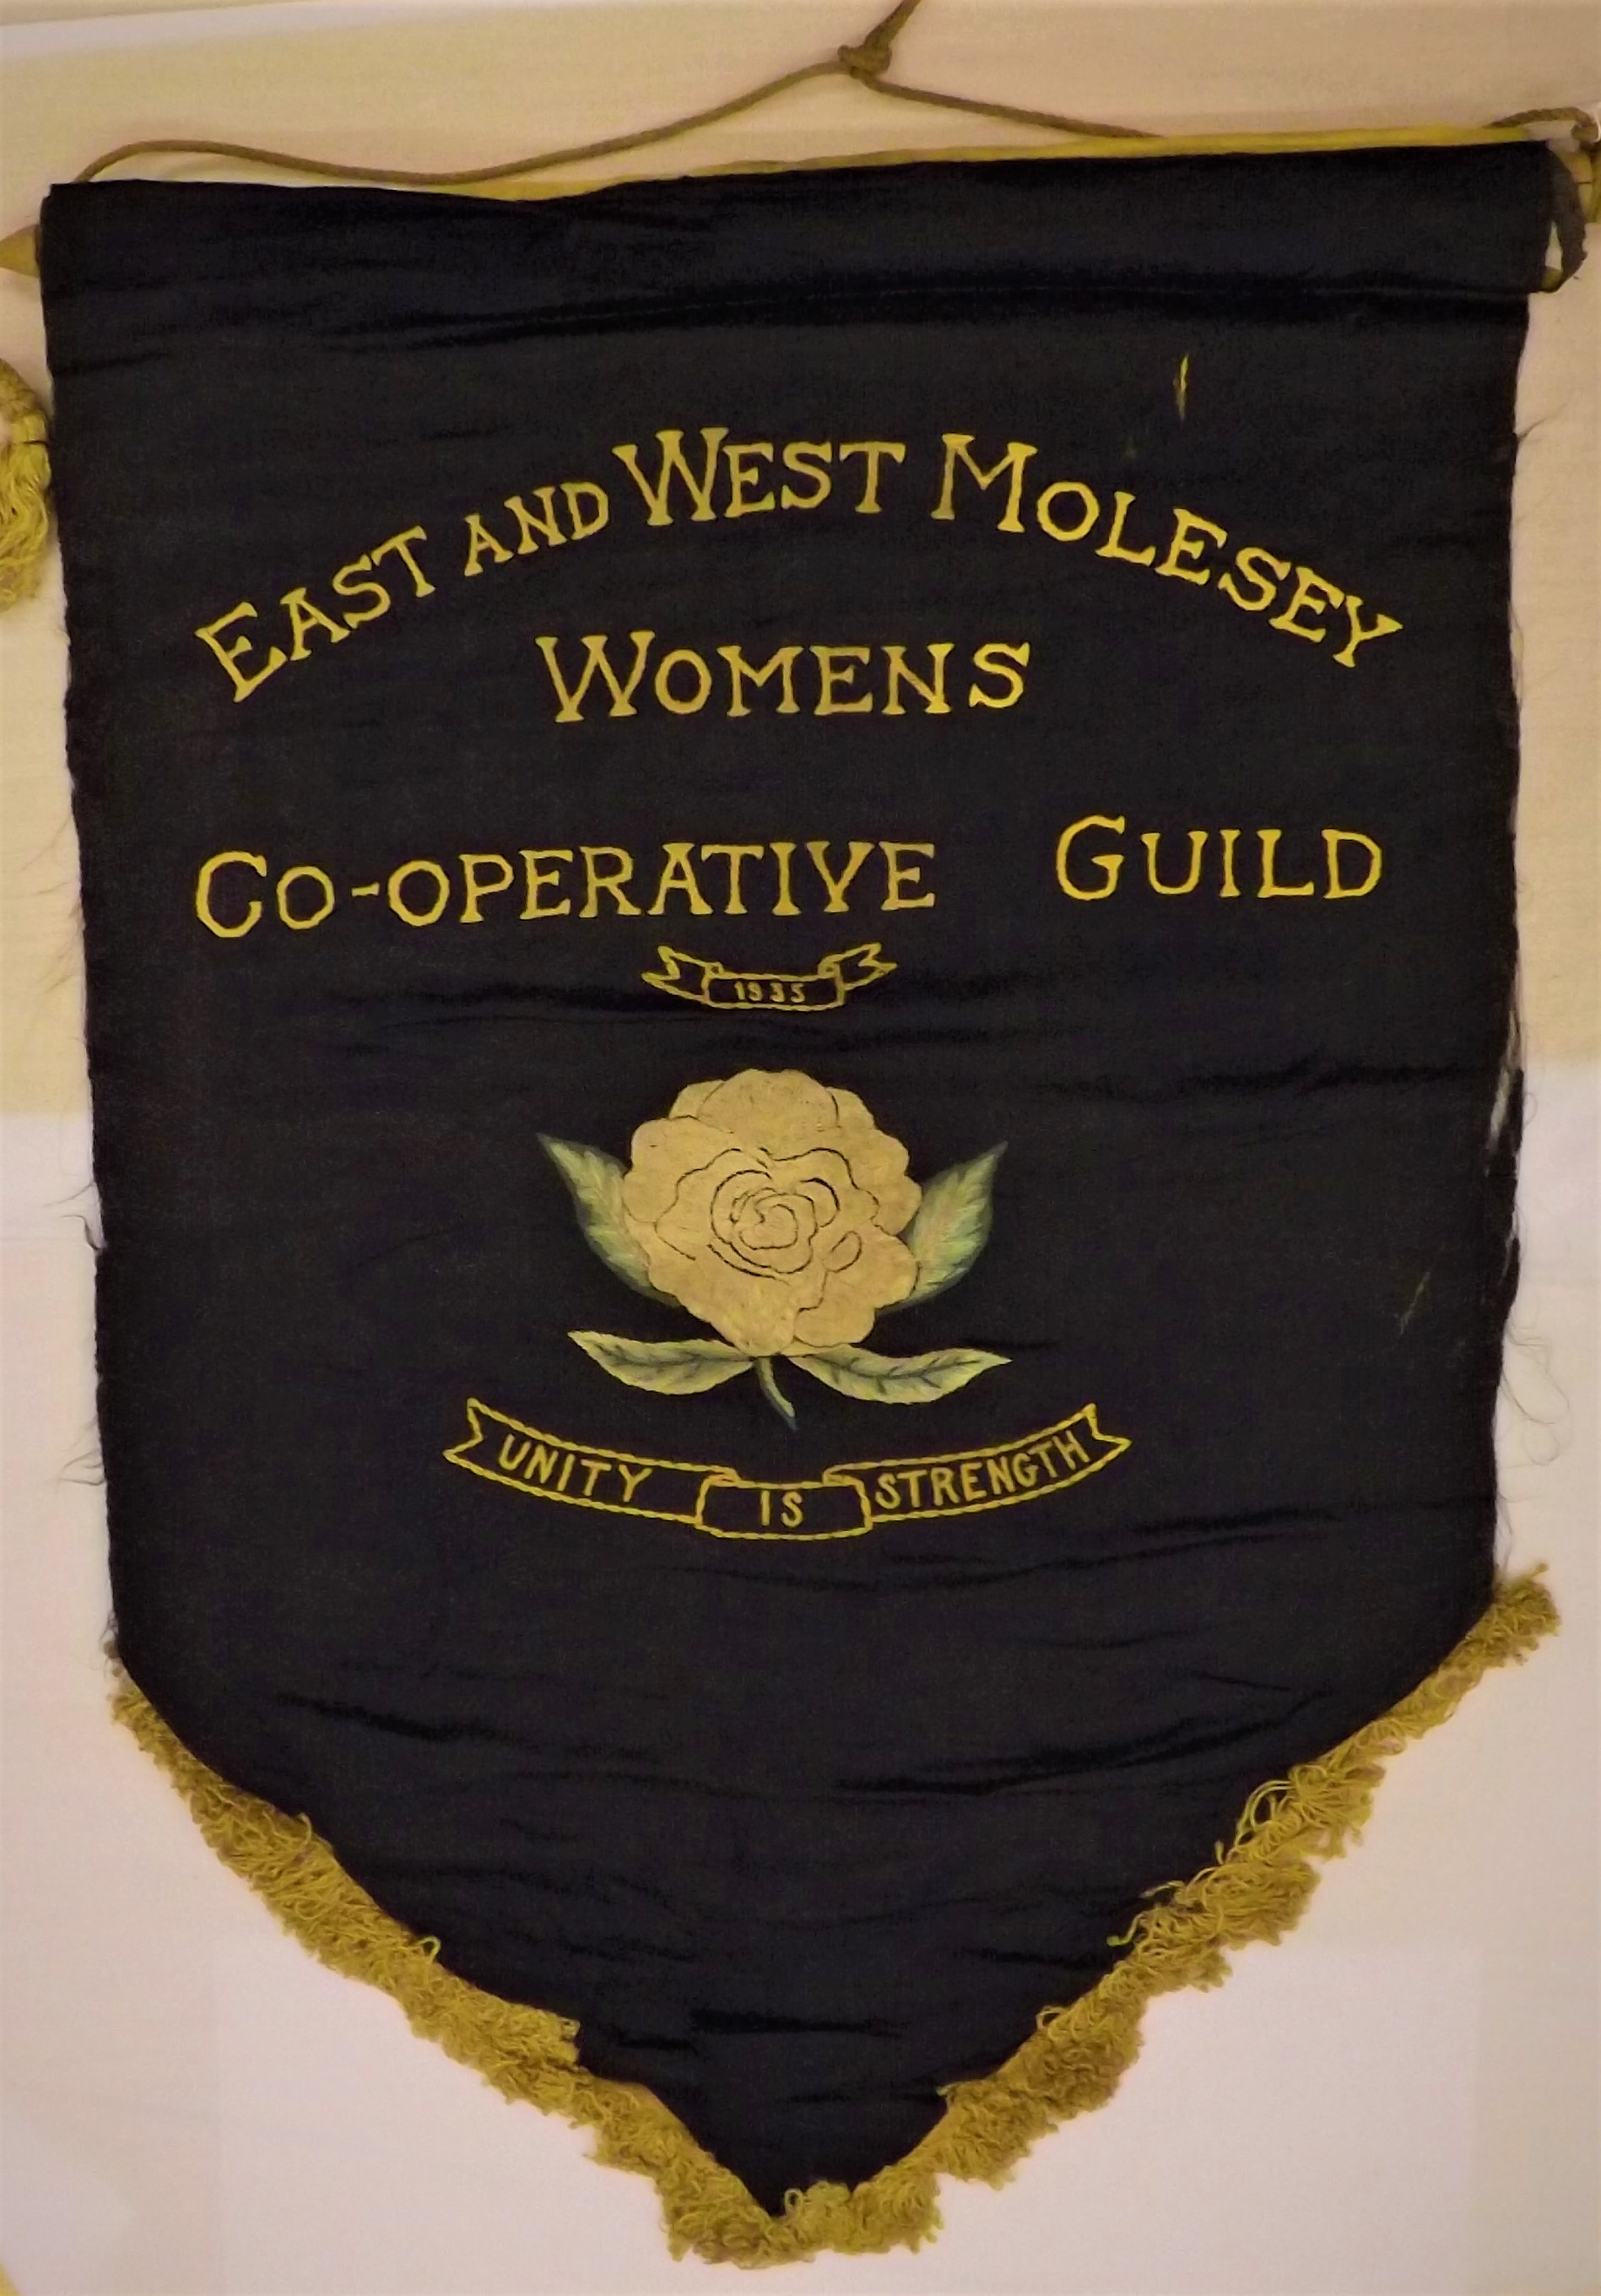 Banner from the East and West Molesey Women's Cooperative Guild, an organisation descended, in part, from the Women's Freedom League.